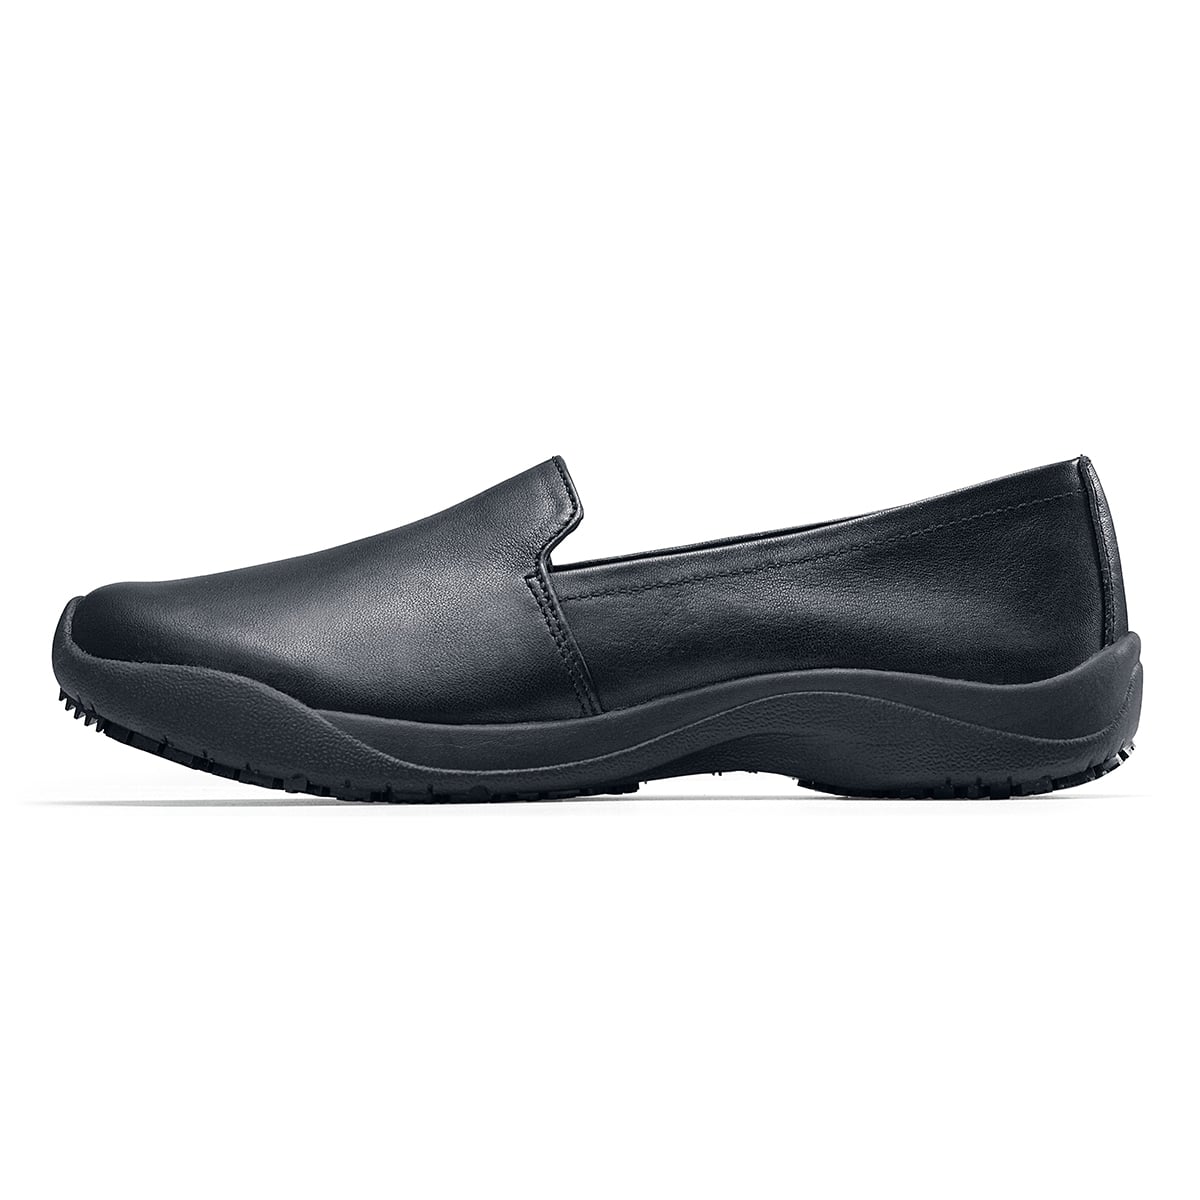 The Jasmine Black by Lila from Shoes for Crews are slip-resistant, casual, lightweight and water-resistant shoes, seen from the left.